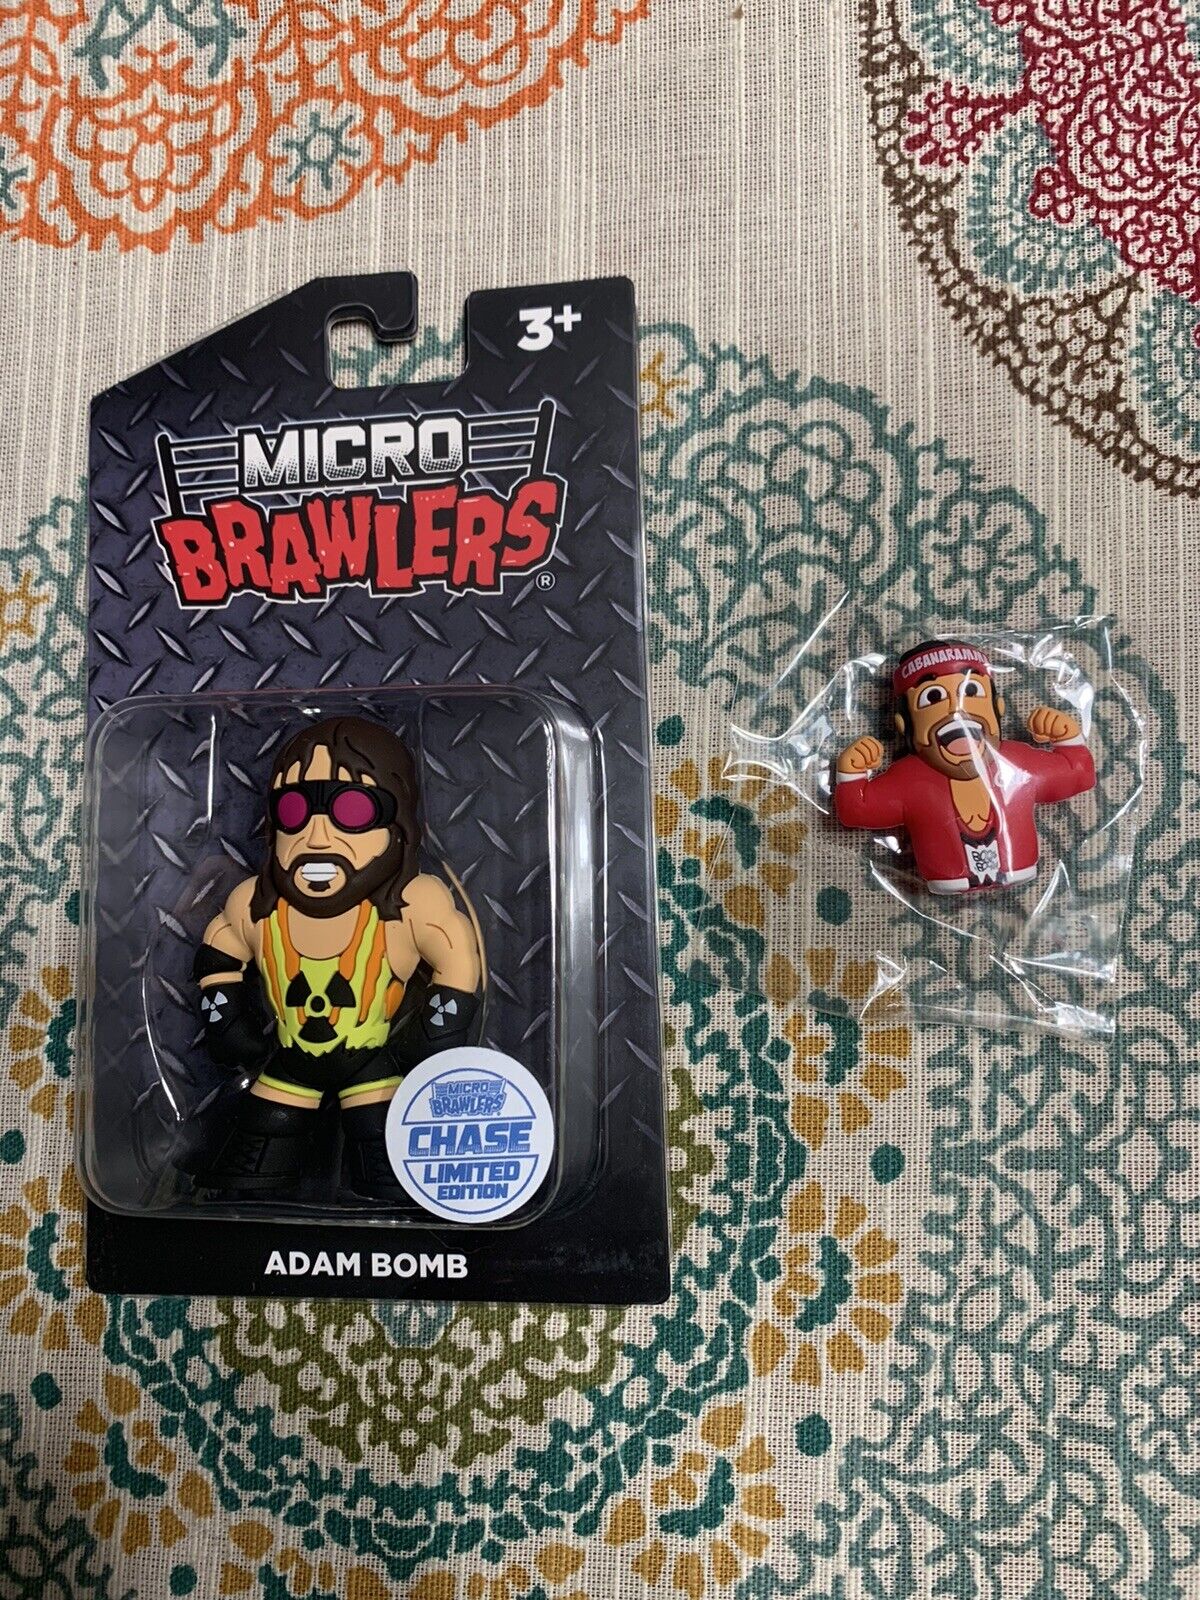 Pro Wrestling Crate Micro Brawlers Adam Bomb Chase Limited 250 WWE WCW NJPW  AEW for Sale - Celebrity Cars Blog